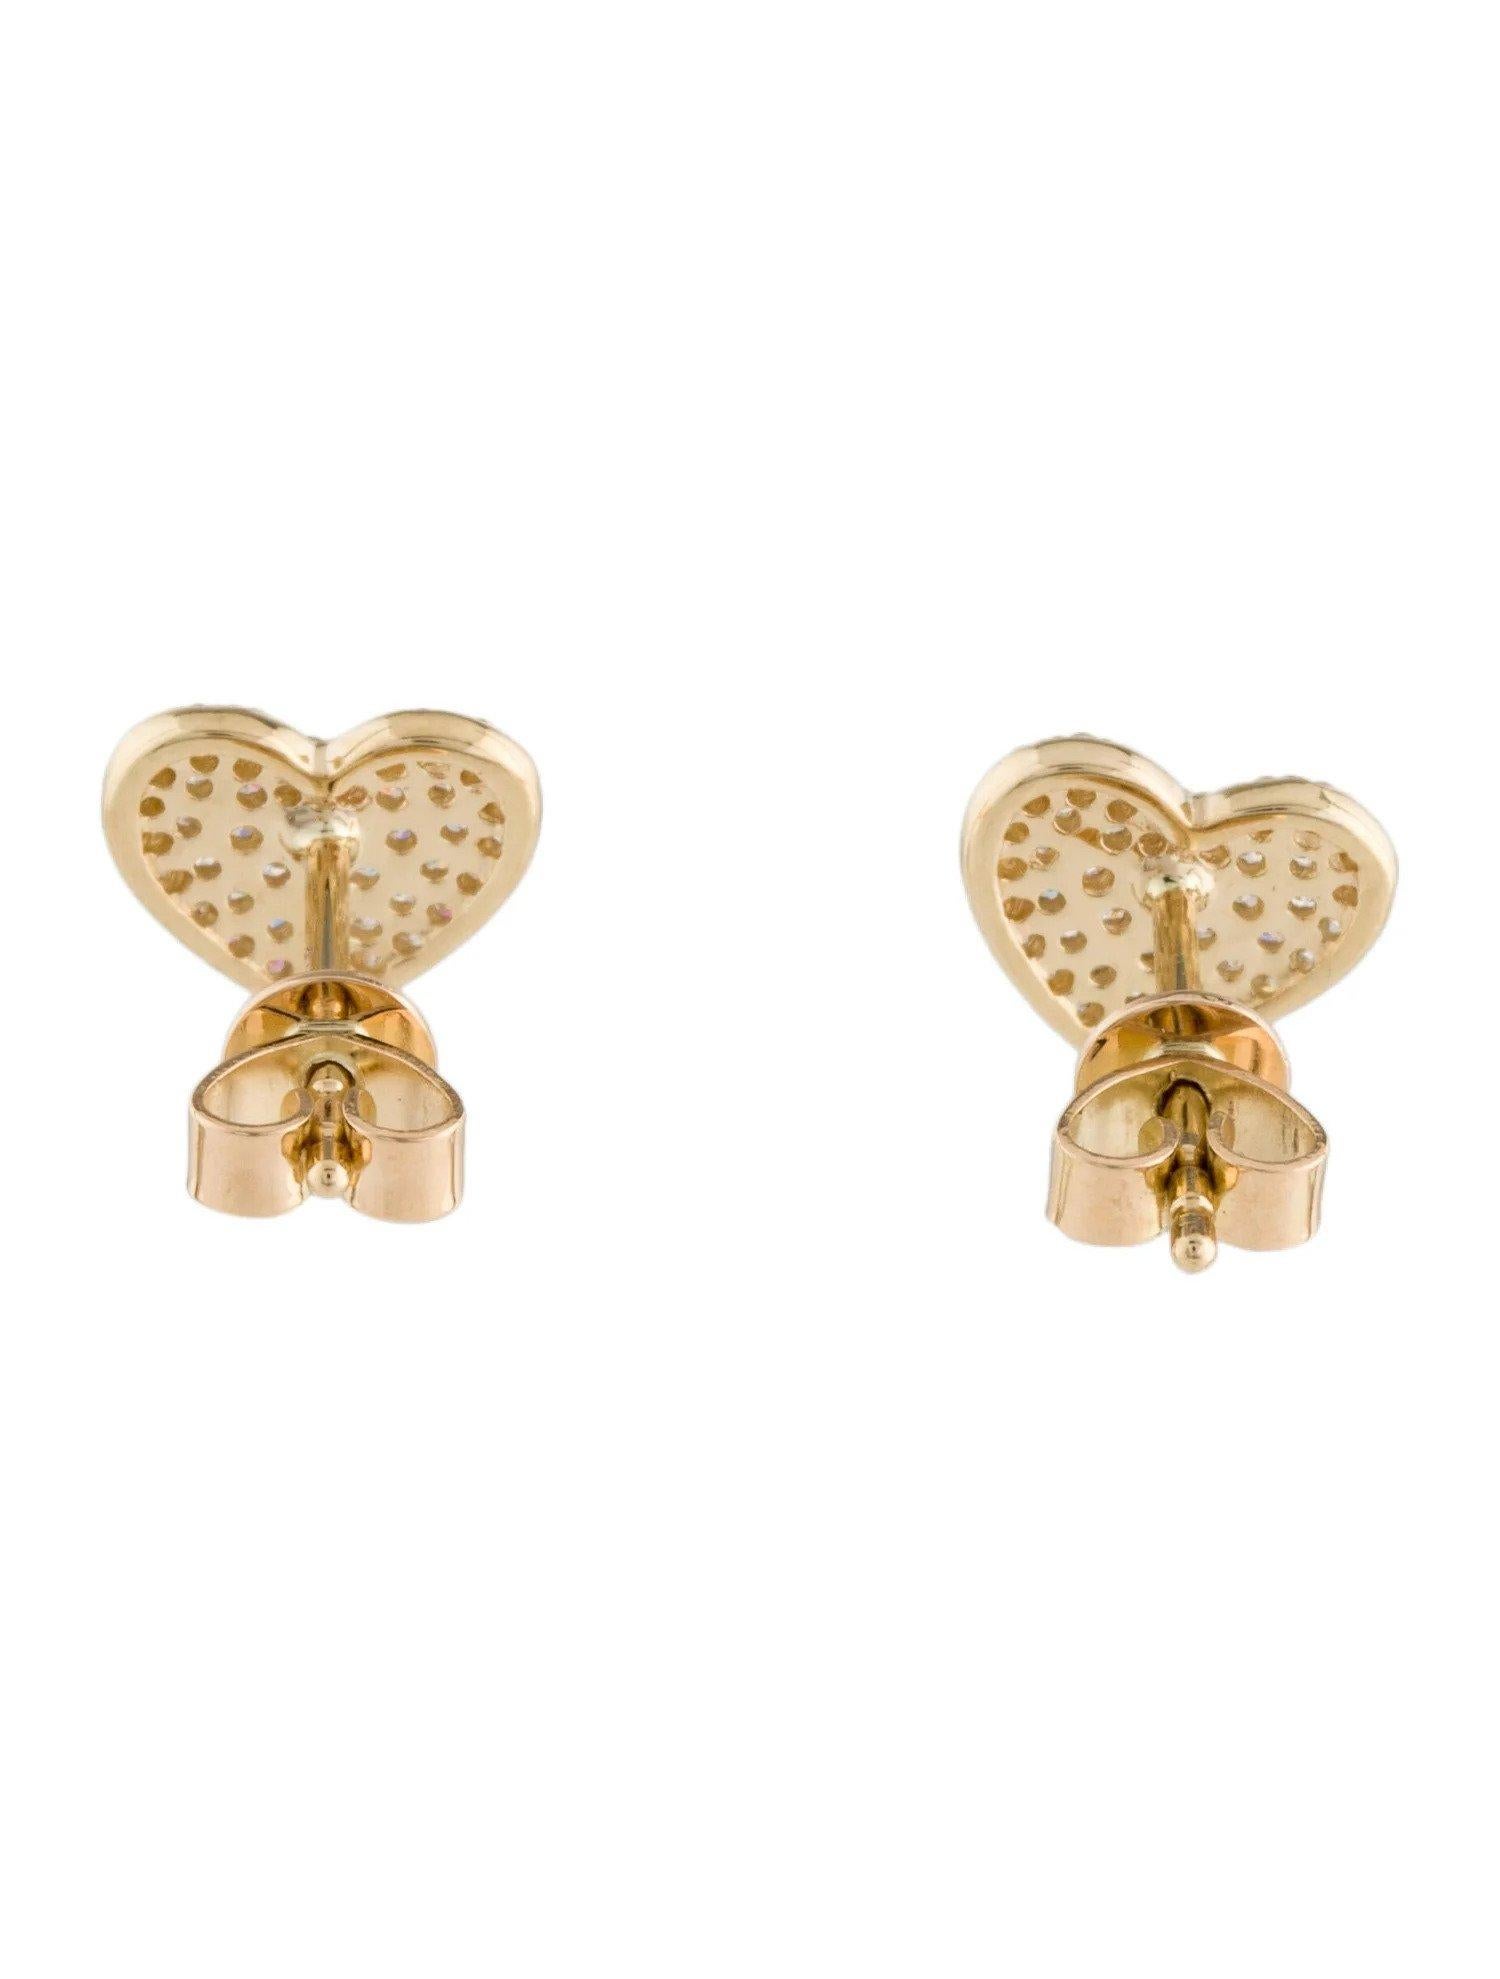 0.25 Carat Diamond Heart Yellow Gold Stud Earrings  In New Condition For Sale In Great Neck, NY